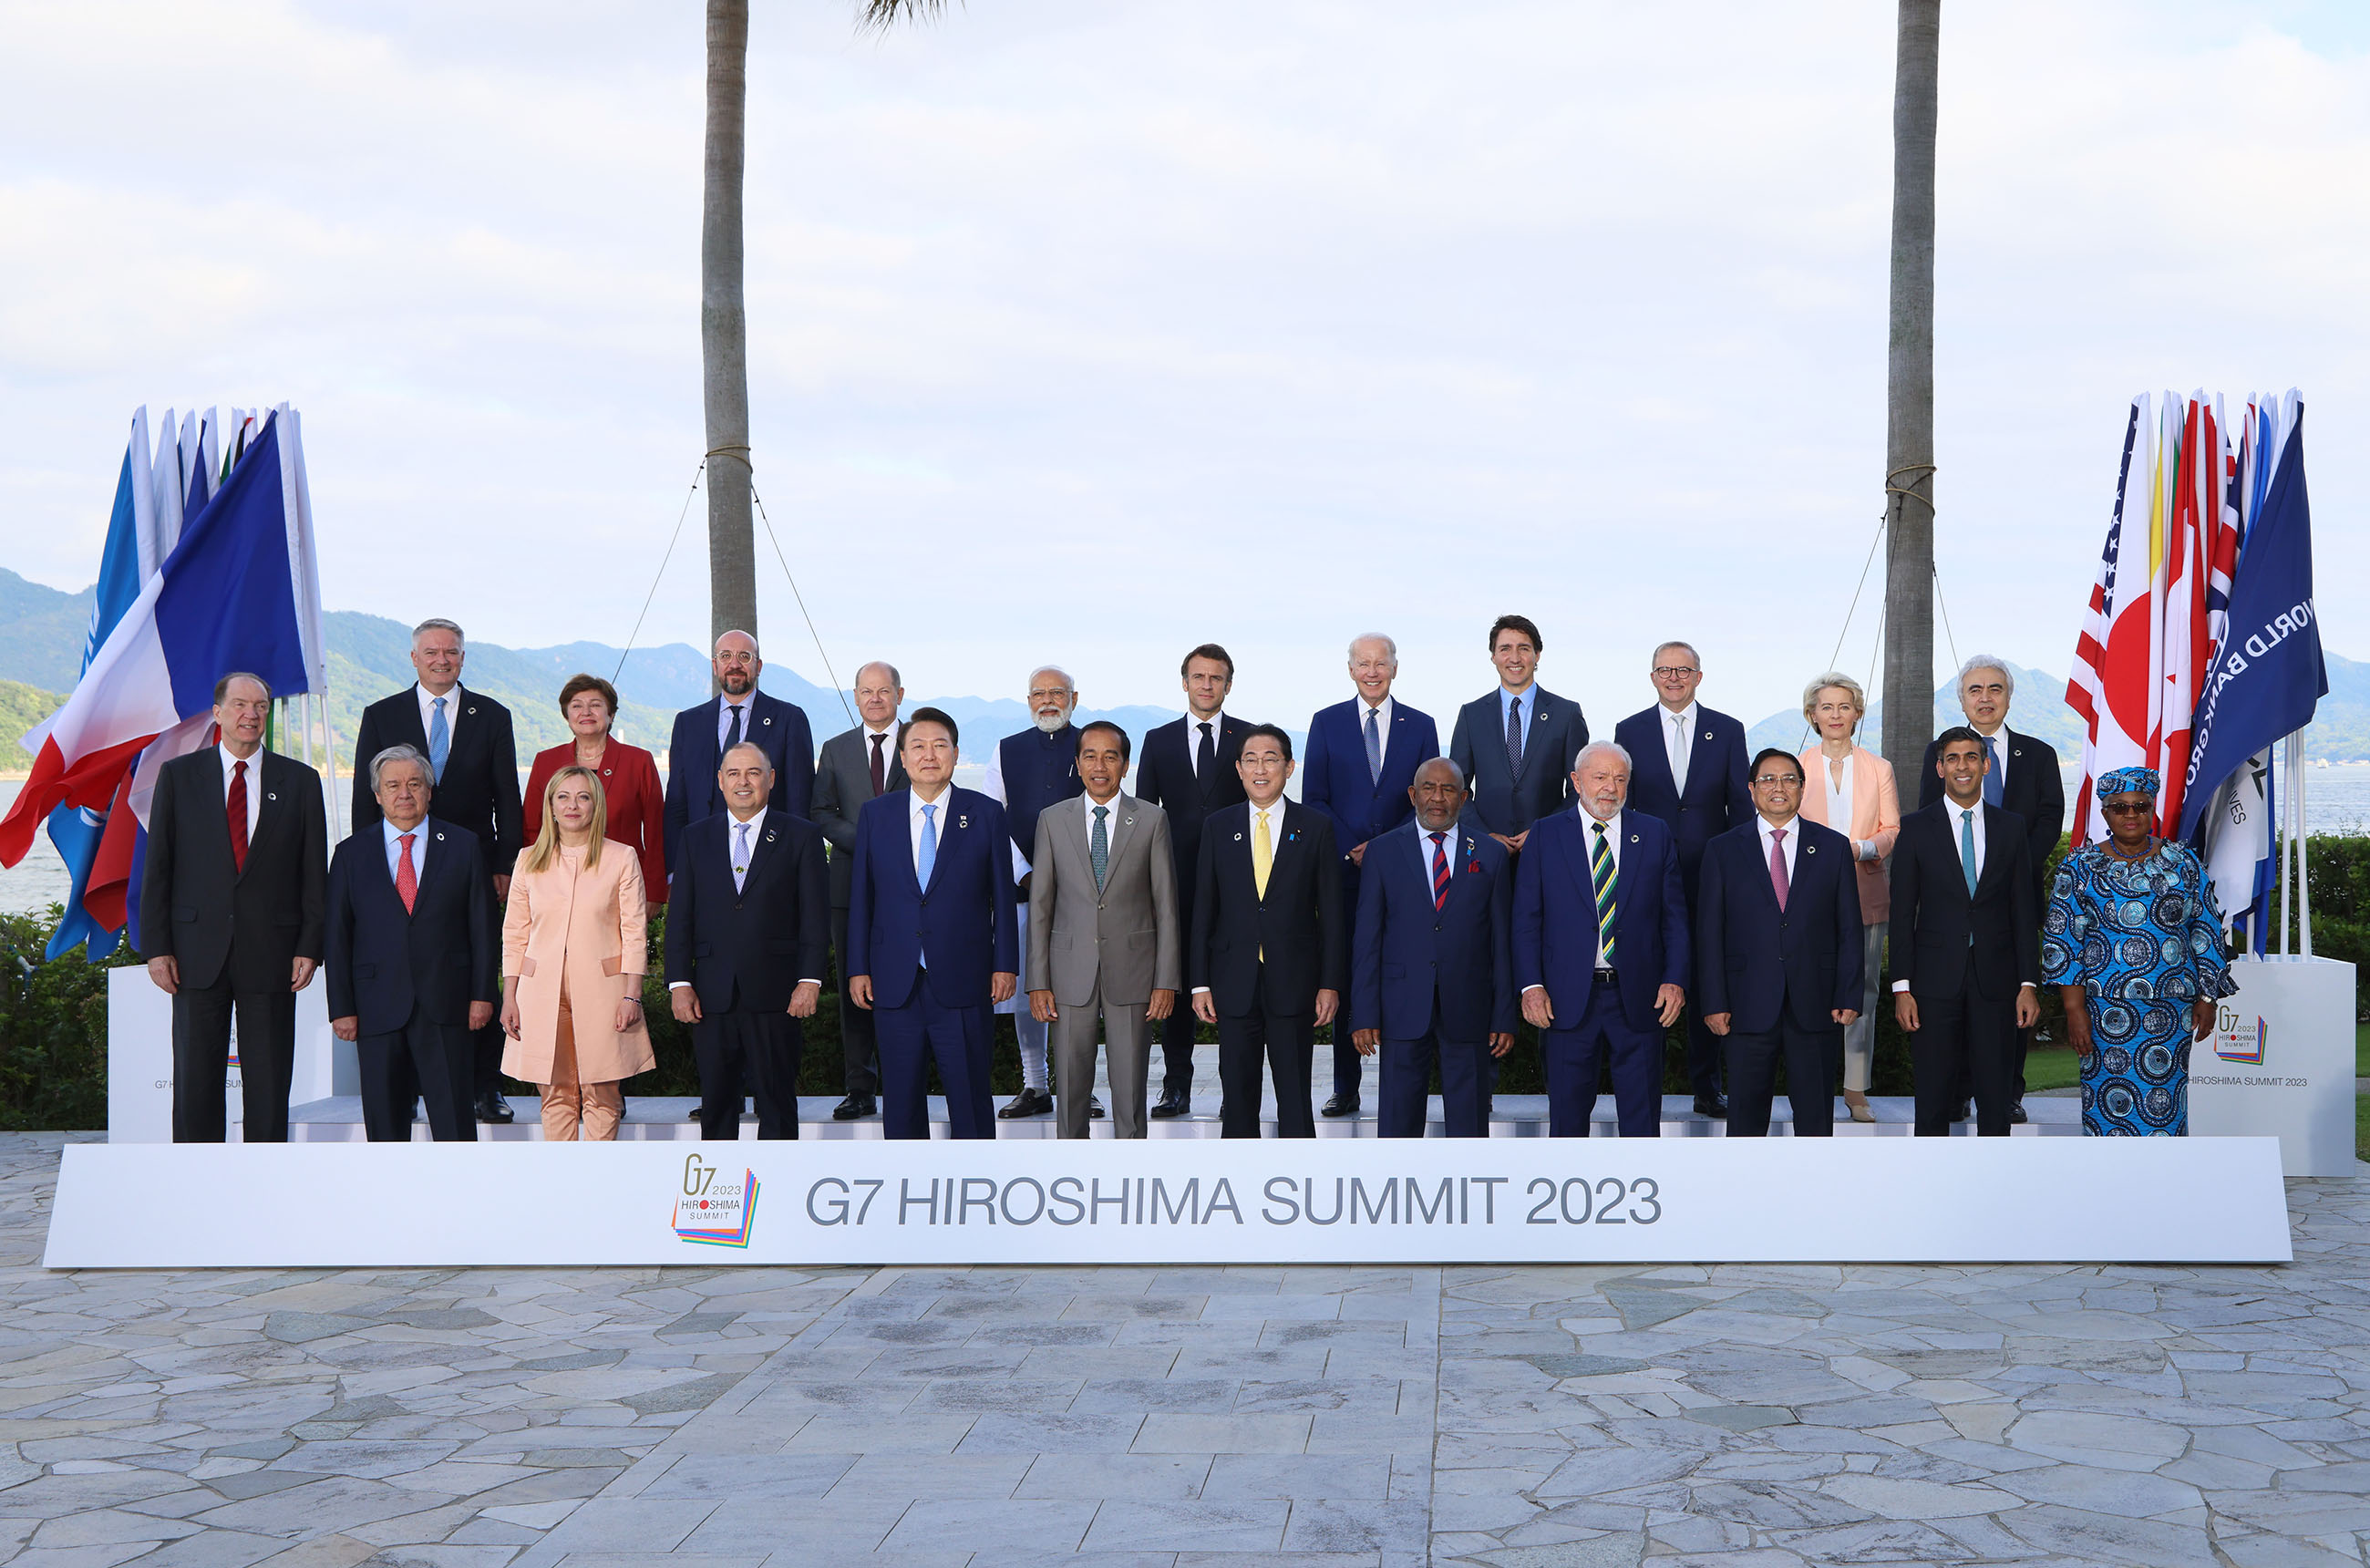 G7 Hiroshima Summit (Second Day): Events with the Invited Countries and Others